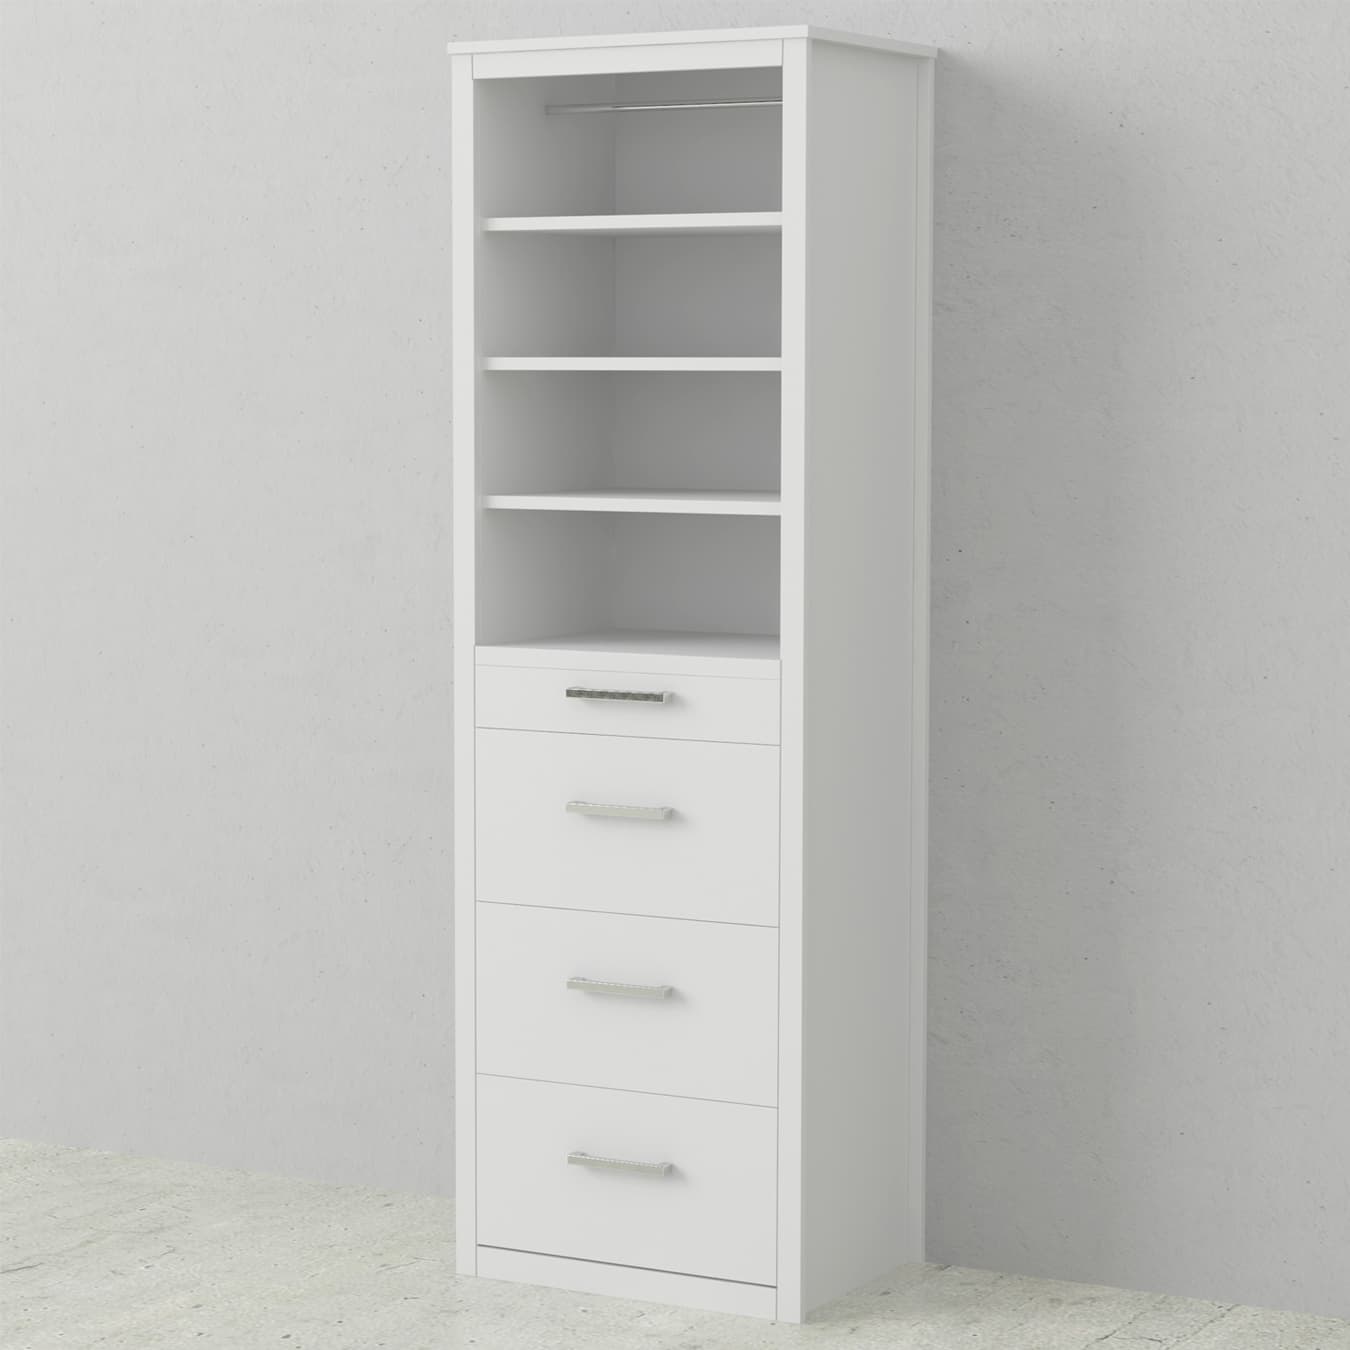 storage cabinet with adjustable shelves pullout nightstand and drawers bar for hanging clothes customizable storage